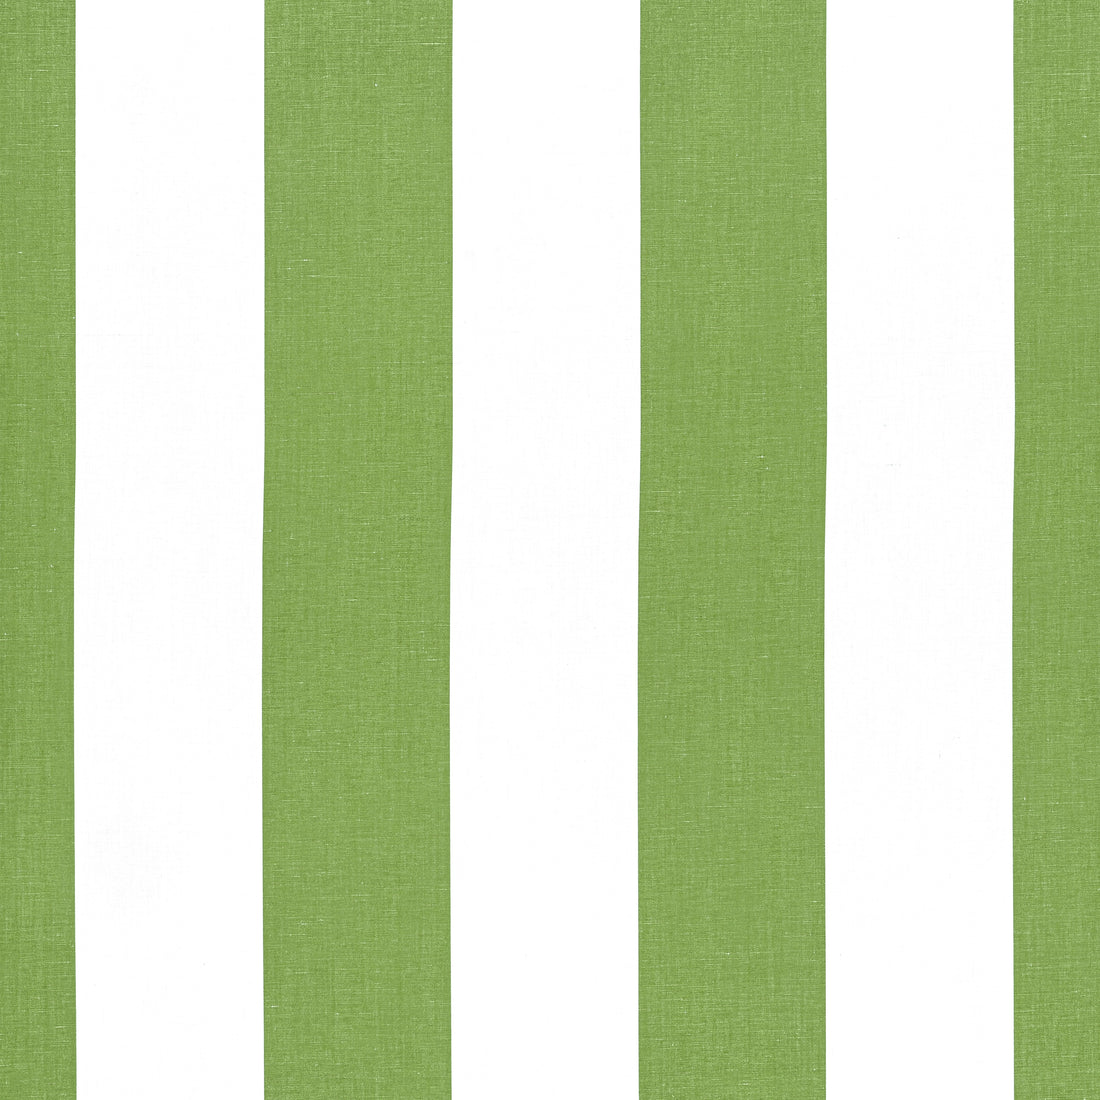 Bergamo Stripe fabric in emerald - pattern number W713639 - by Thibaut in the Grand Palace collection